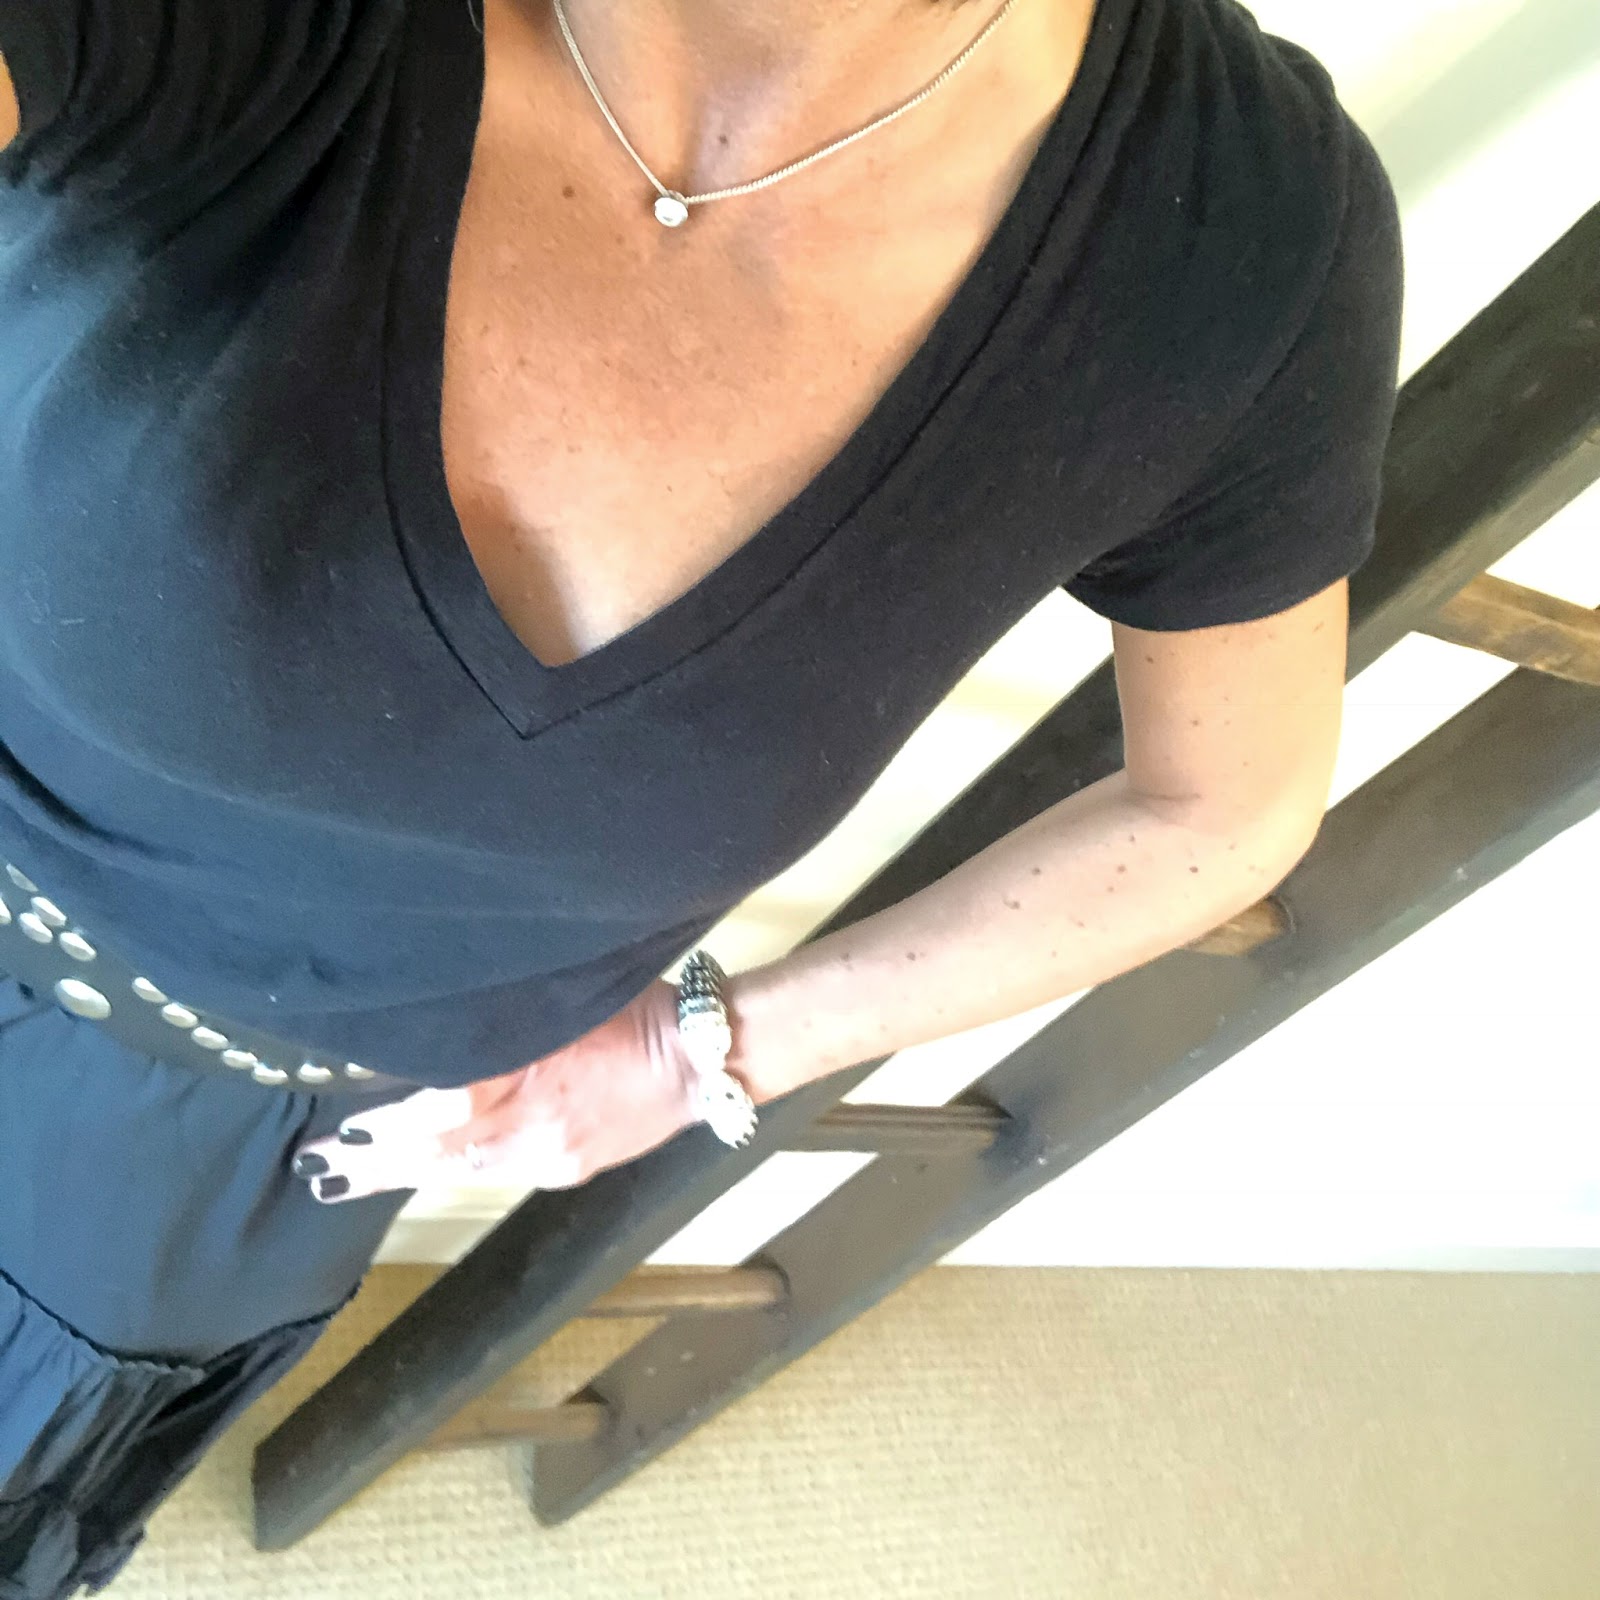 my midlife fashion, j crew vintage v neck tee, isabel marant studded leather waist belt, isabel marant broderie tiered maxi skirt, french sole india cheetah ballet pumps